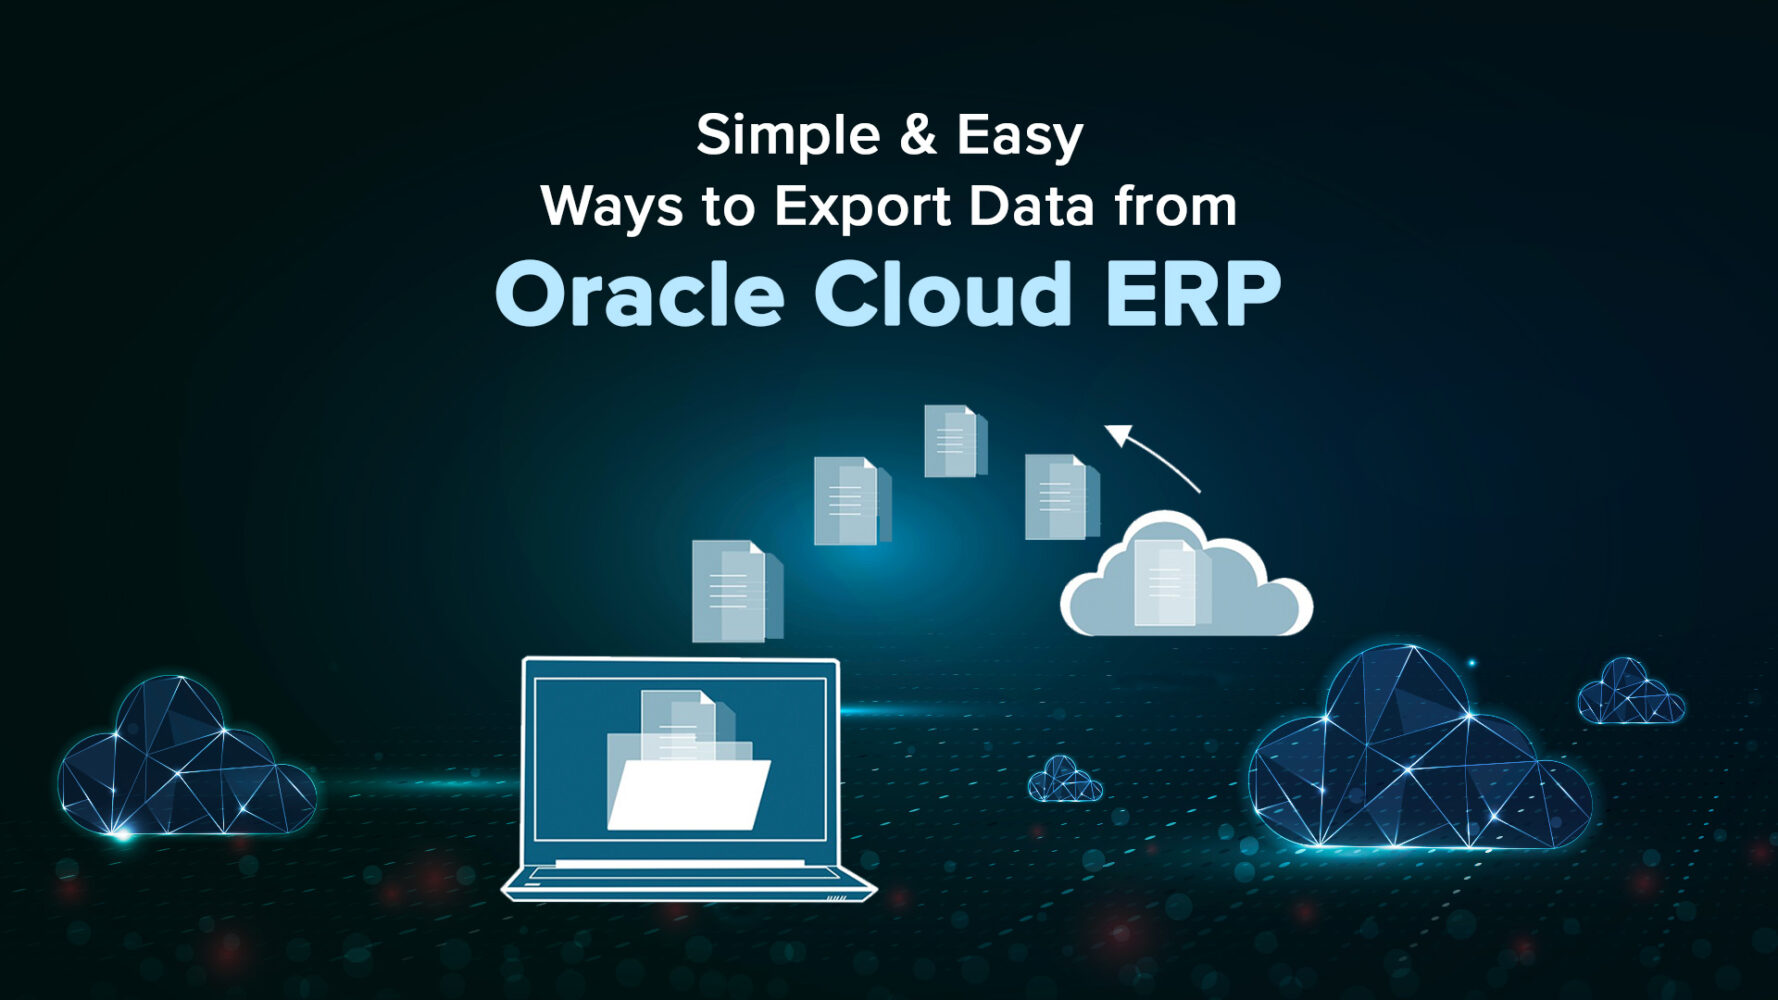 Simple and Easy Ways to Export Data from Oracle Cloud ERP